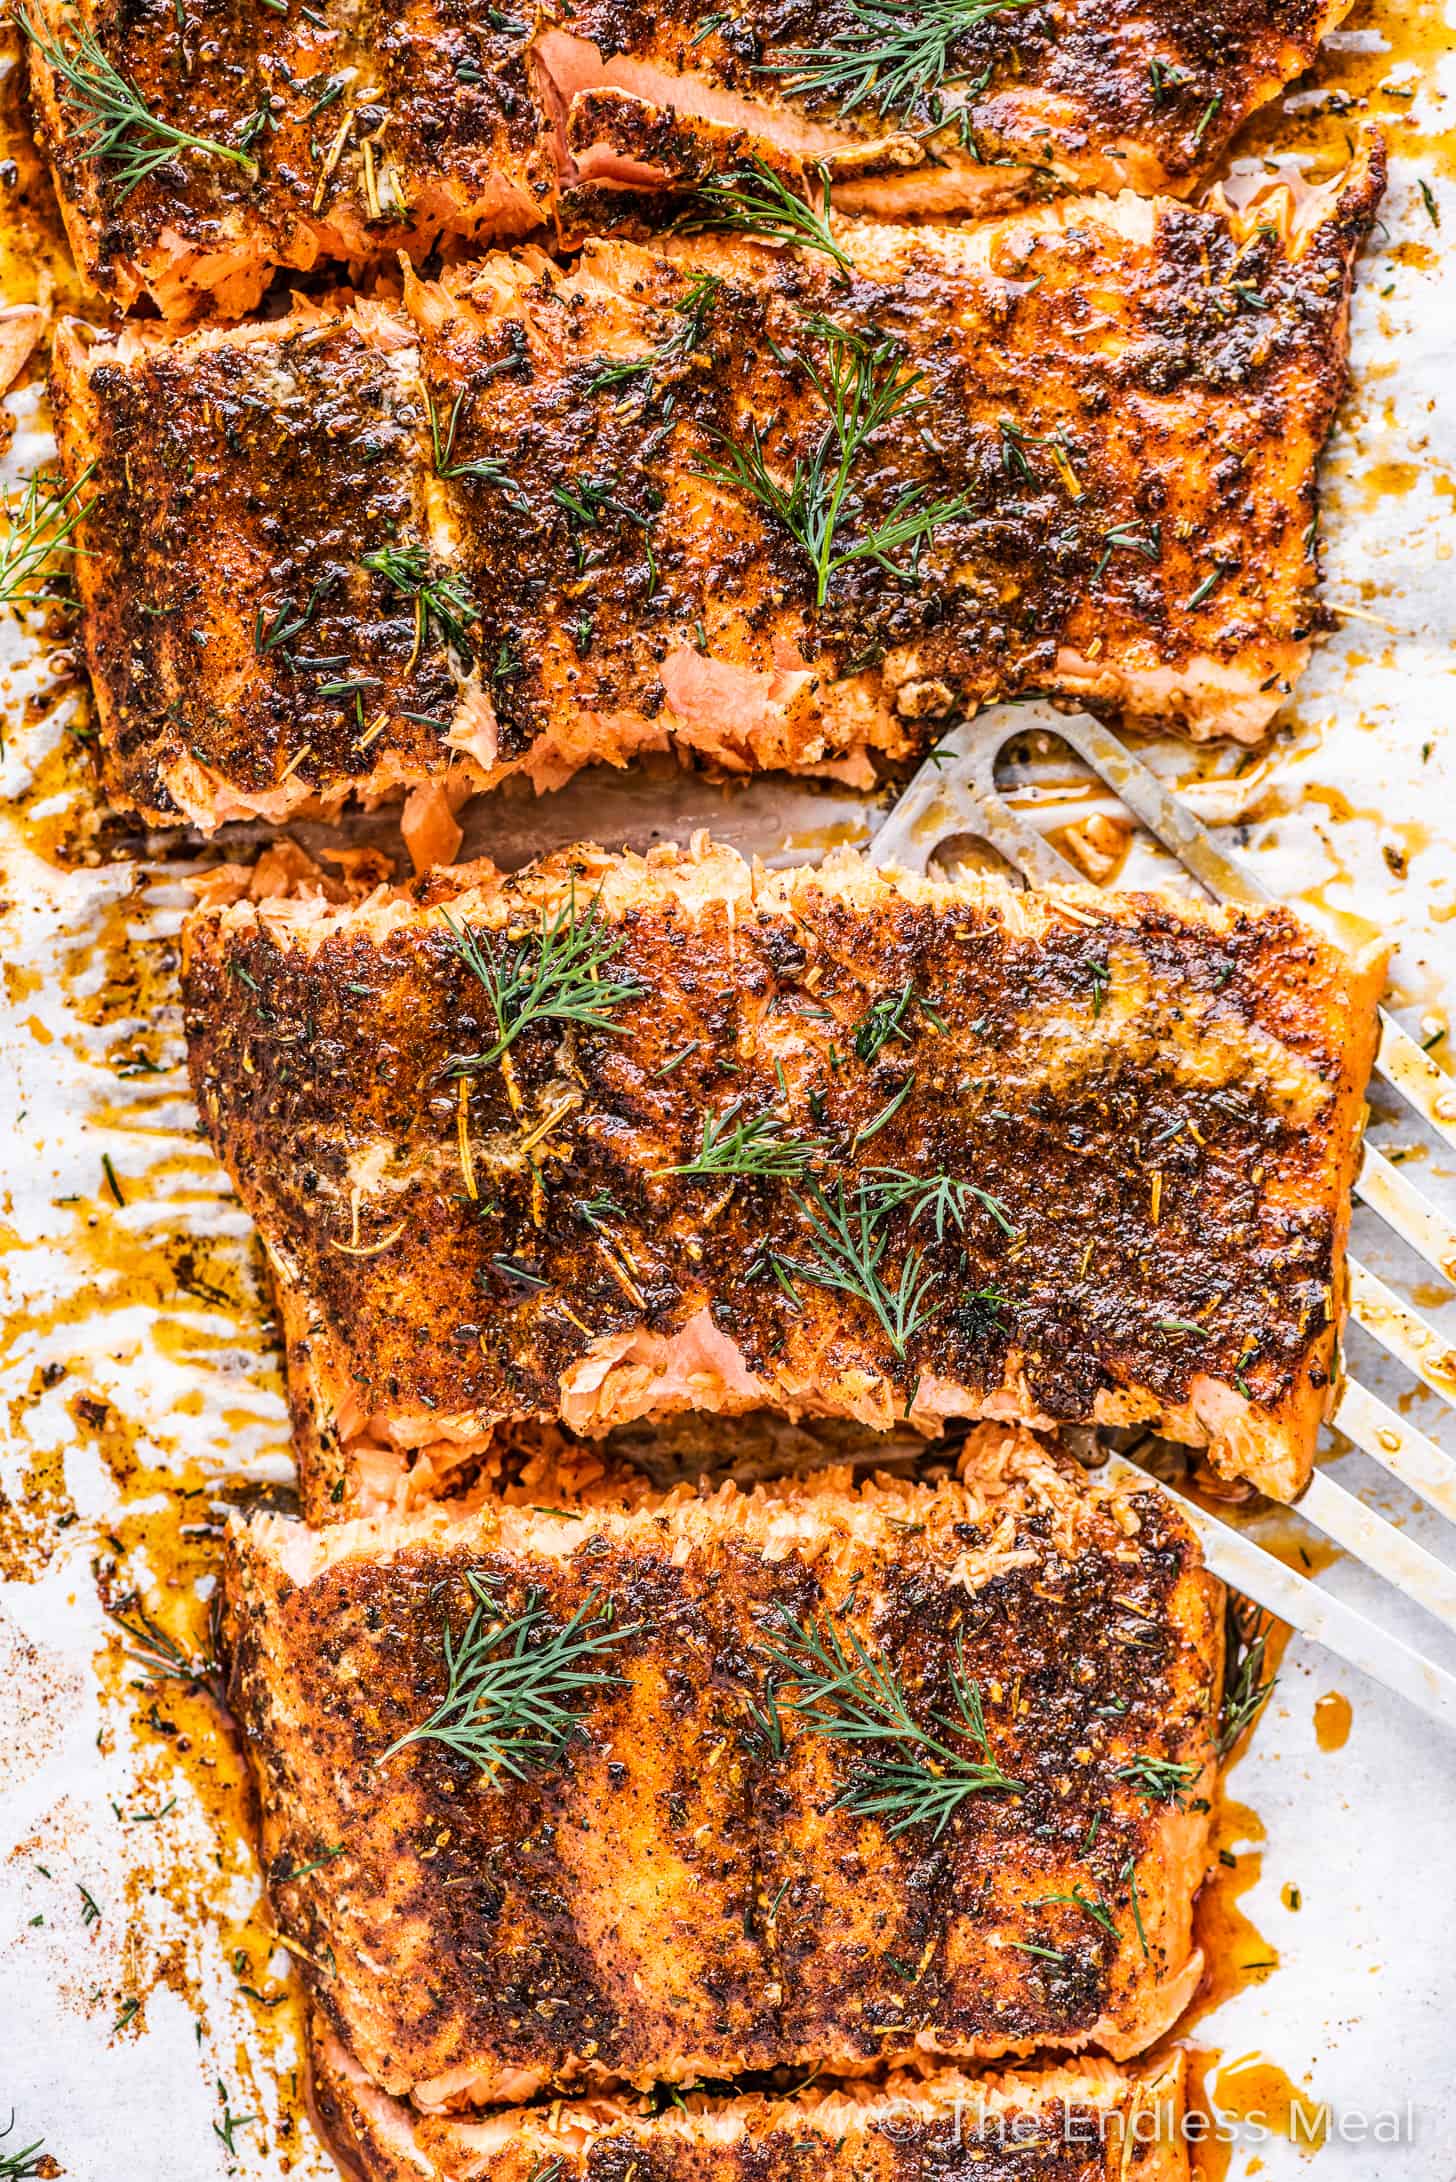 salmon baked low and slow on a baking sheet